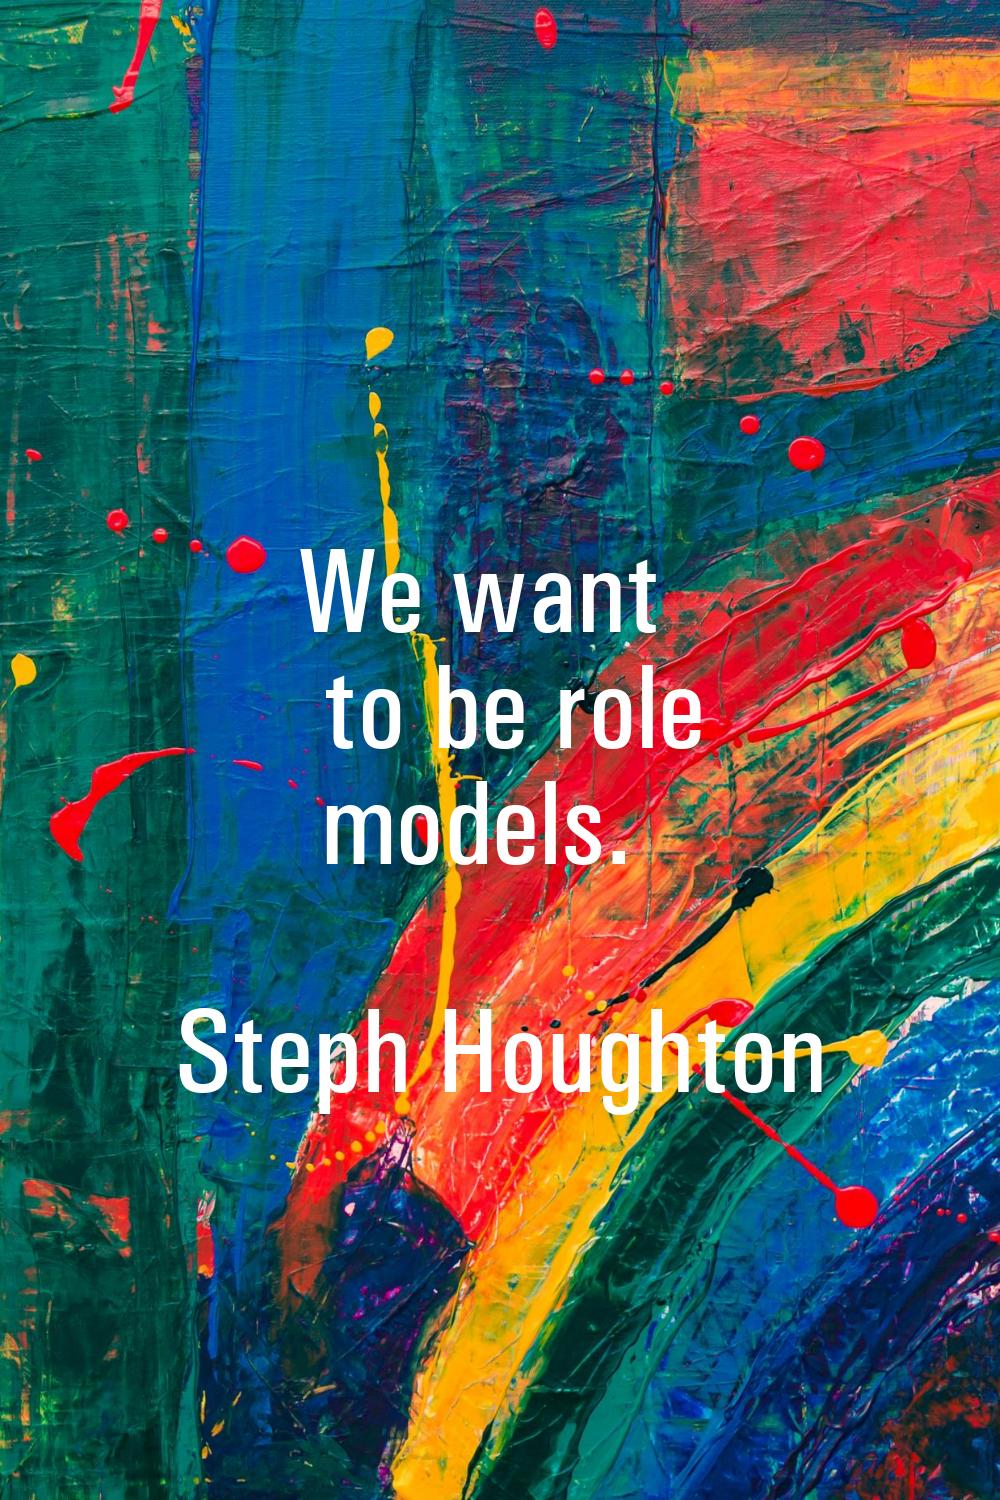 We want to be role models.